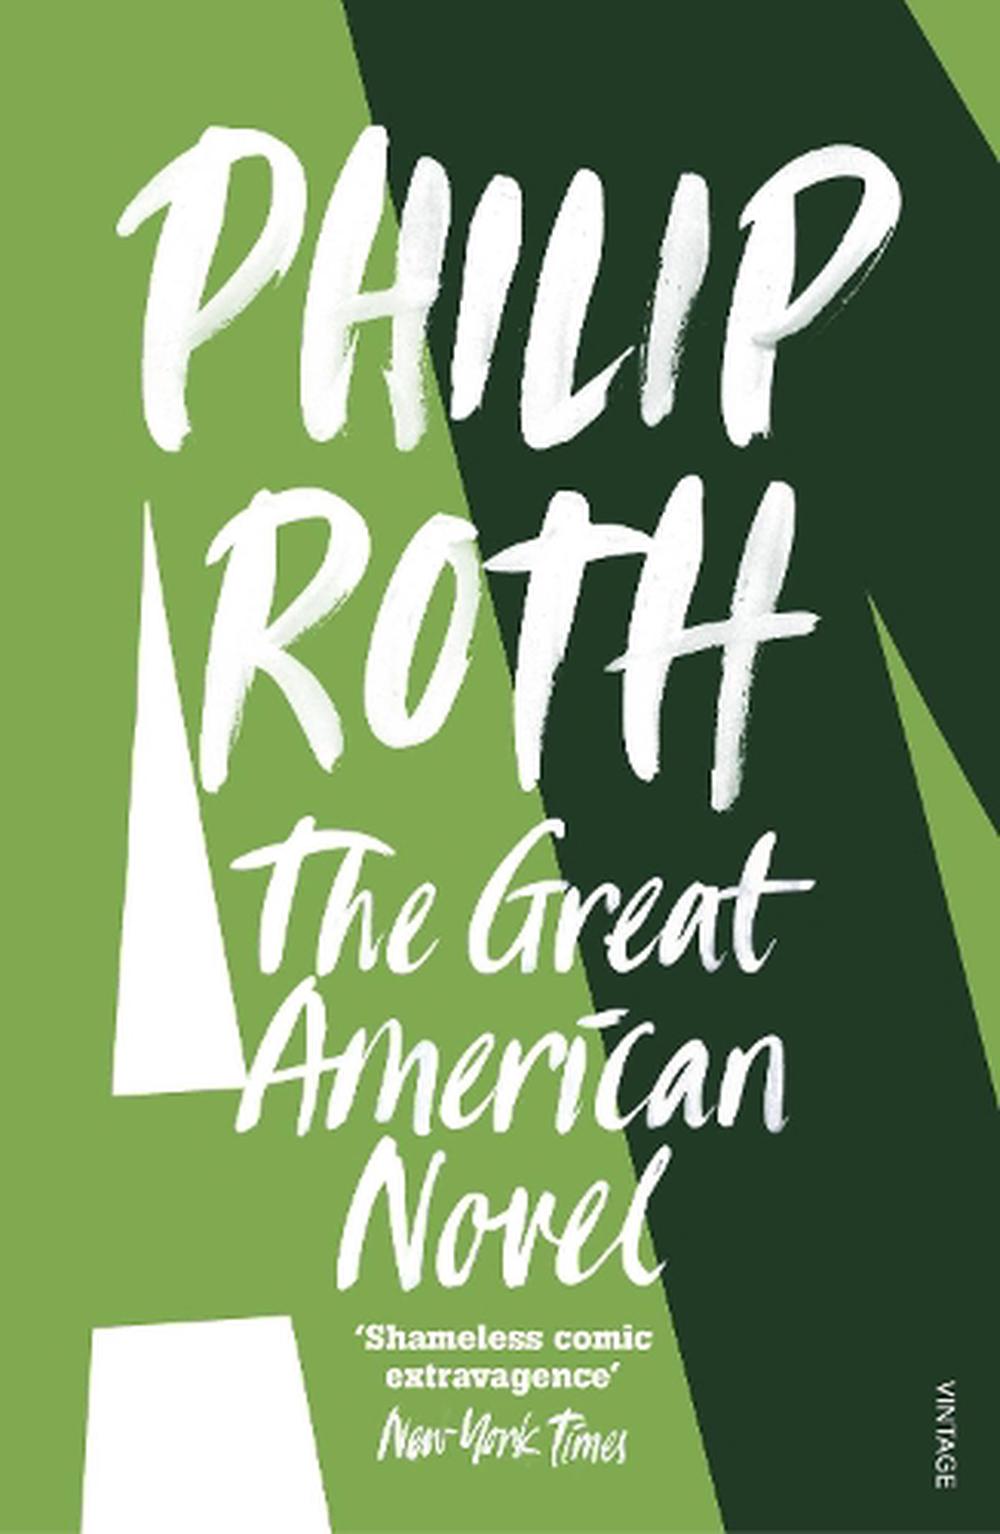 The Great American Novel by Philip Roth, Paperback, 9780099889403 | Buy